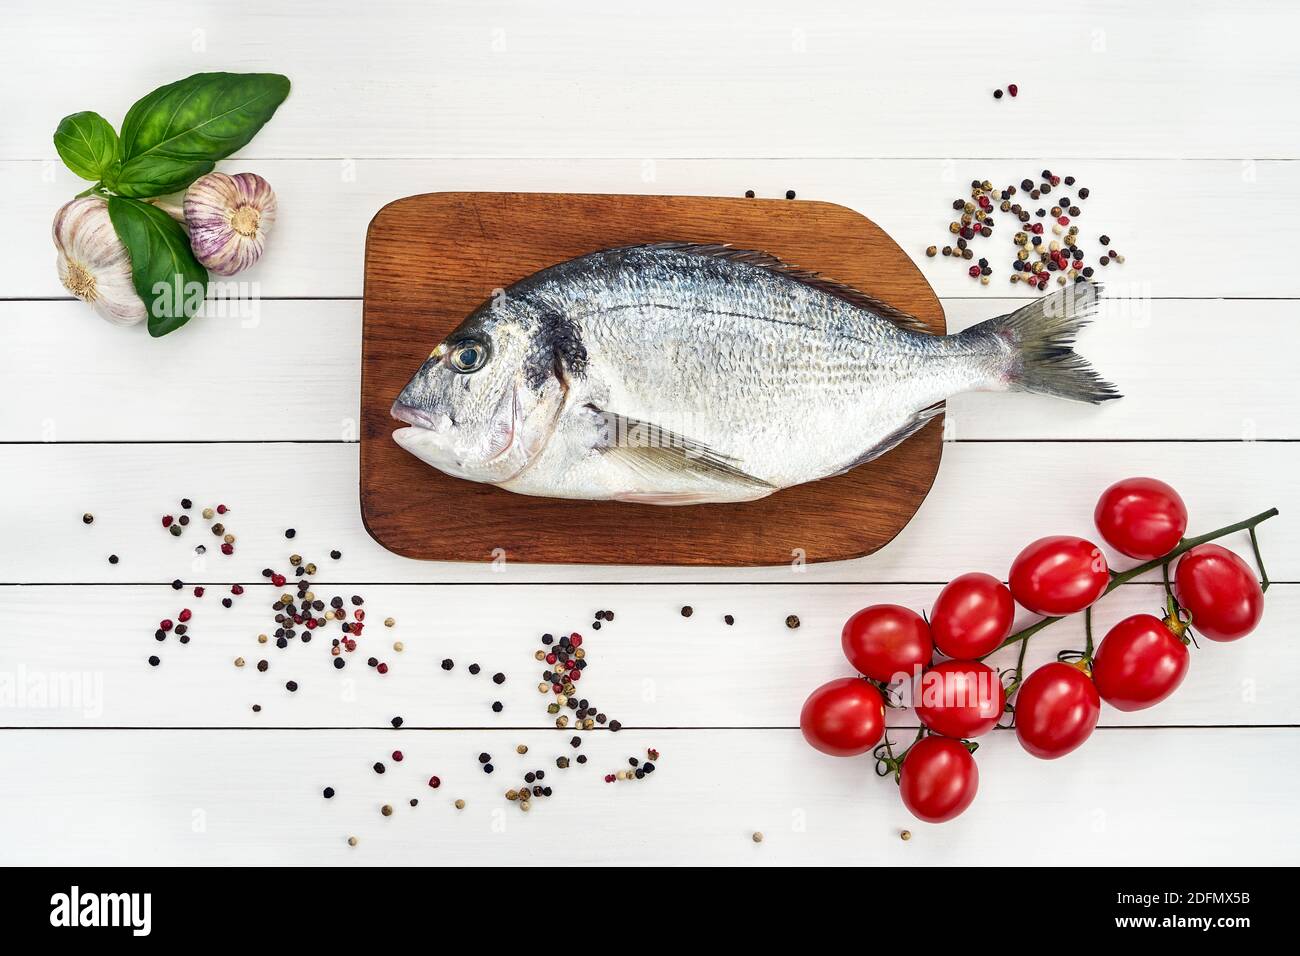 Fresh dorado fish on wooden cutting board with garlic, tomatoes and peppercorns. Top view, copy space Stock Photo